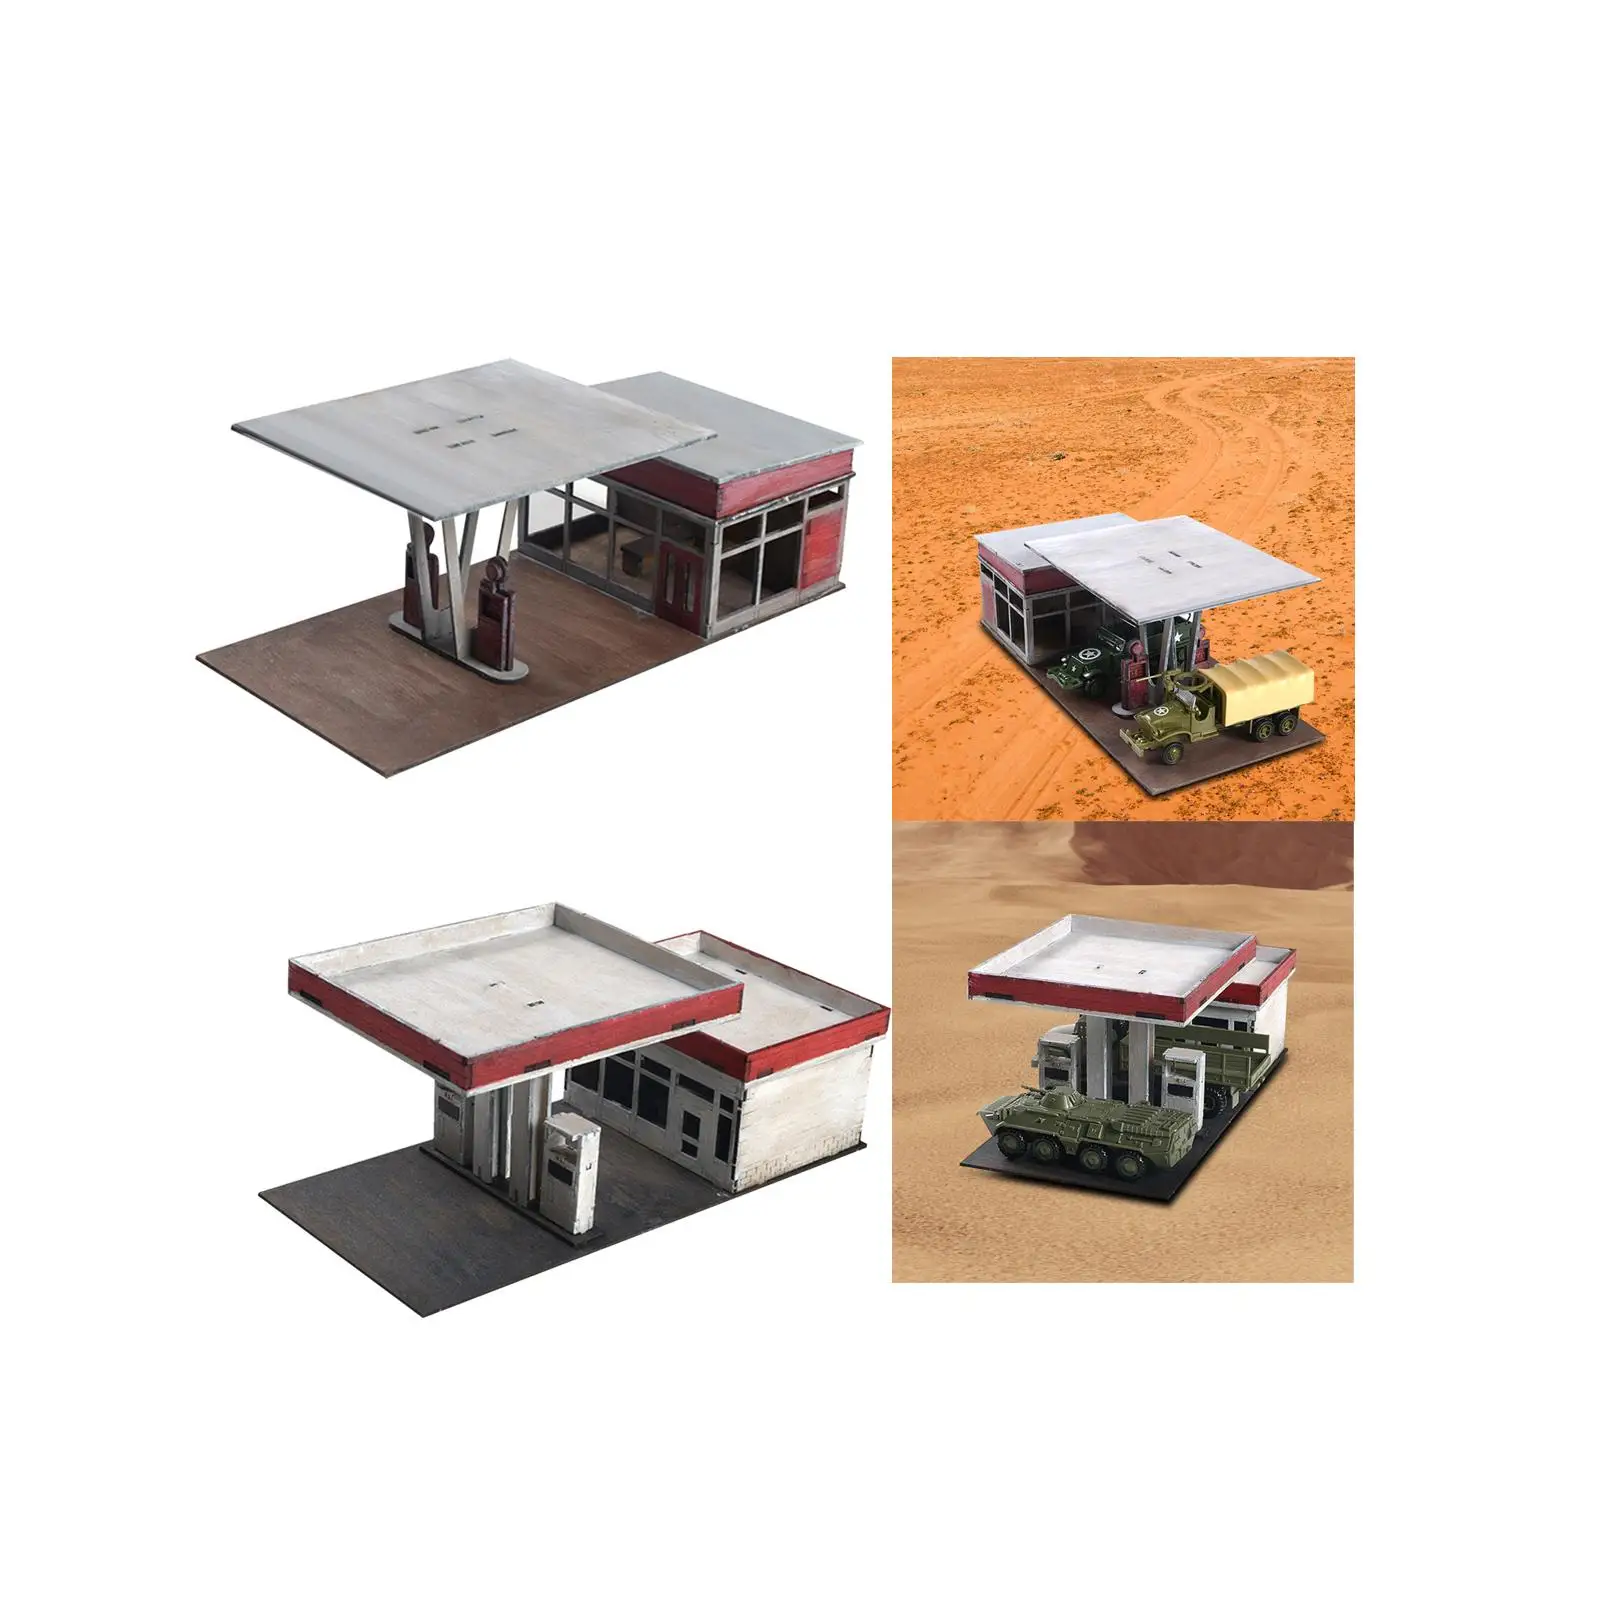 1/72 1/64 Building Model Kits Gas Station Architecture Scene for Micro Landscape Layout War Scene Sand Table Architecture Model